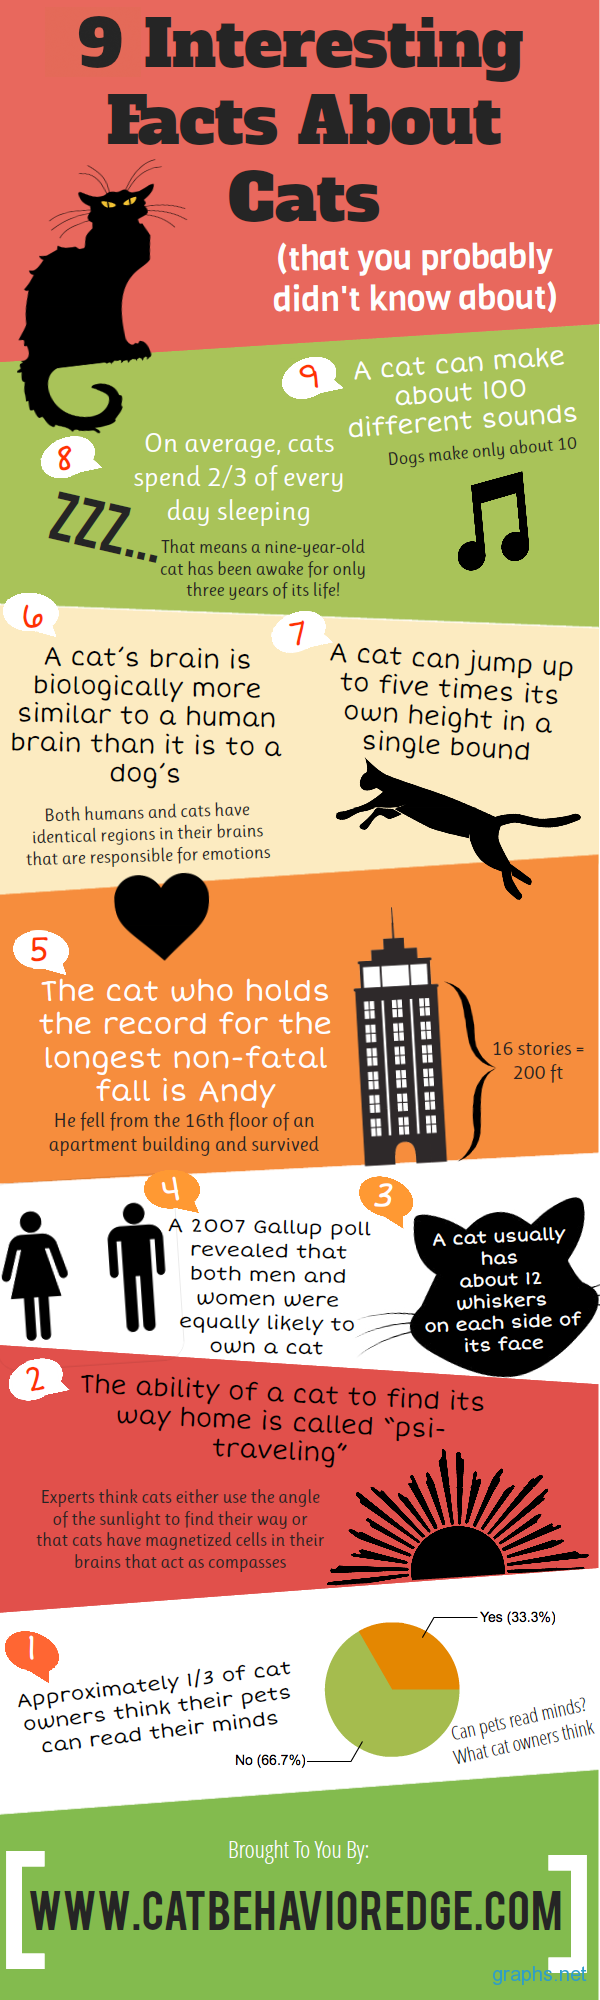 9 Amazing Facts About Cats